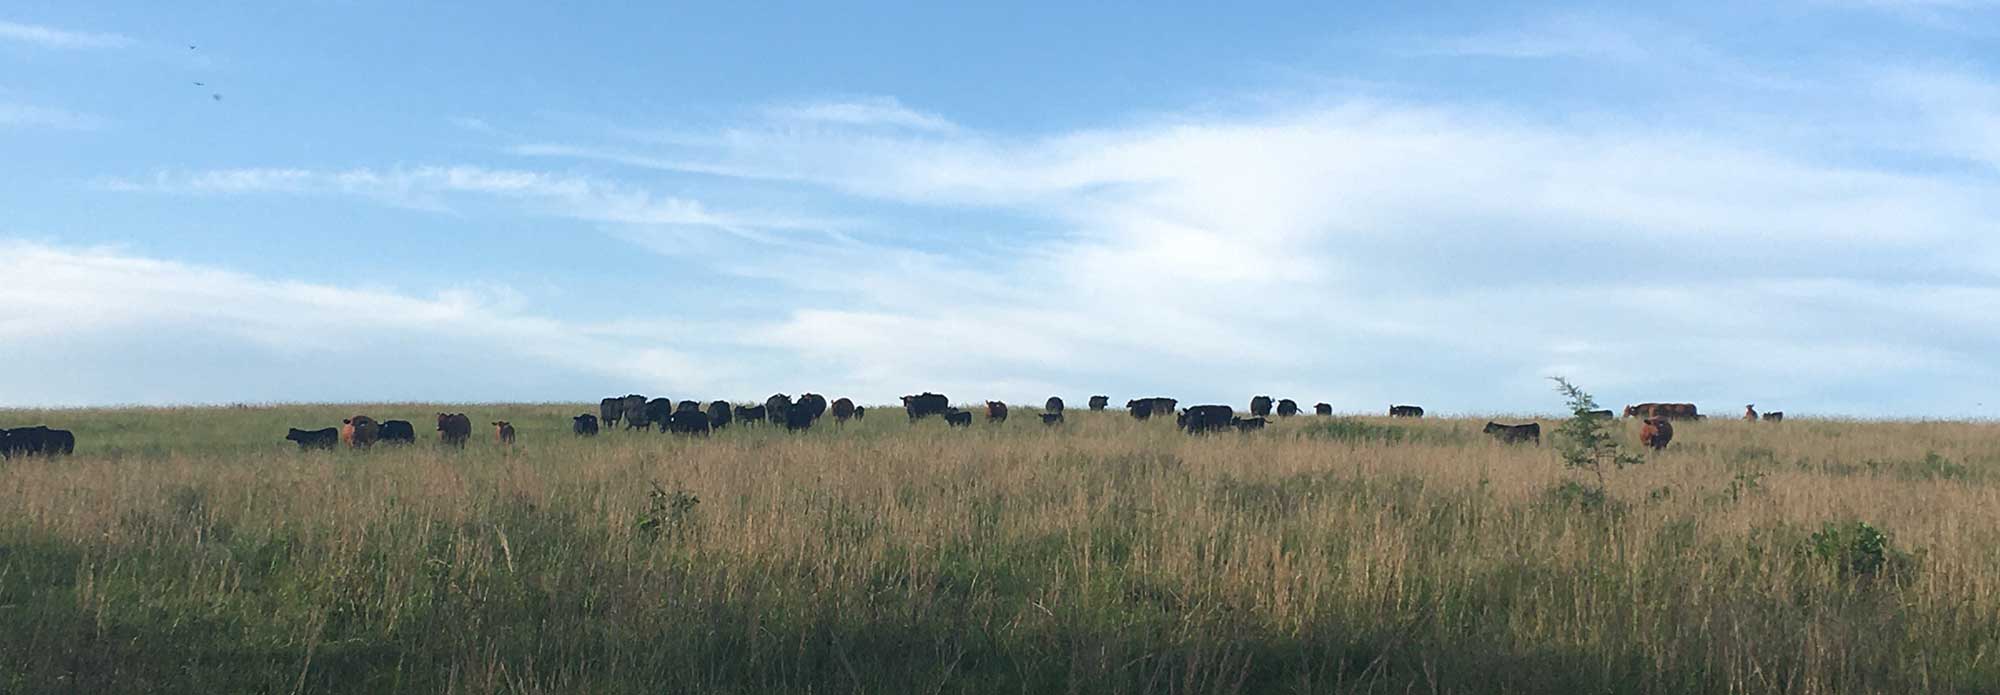 Cows in tall grass